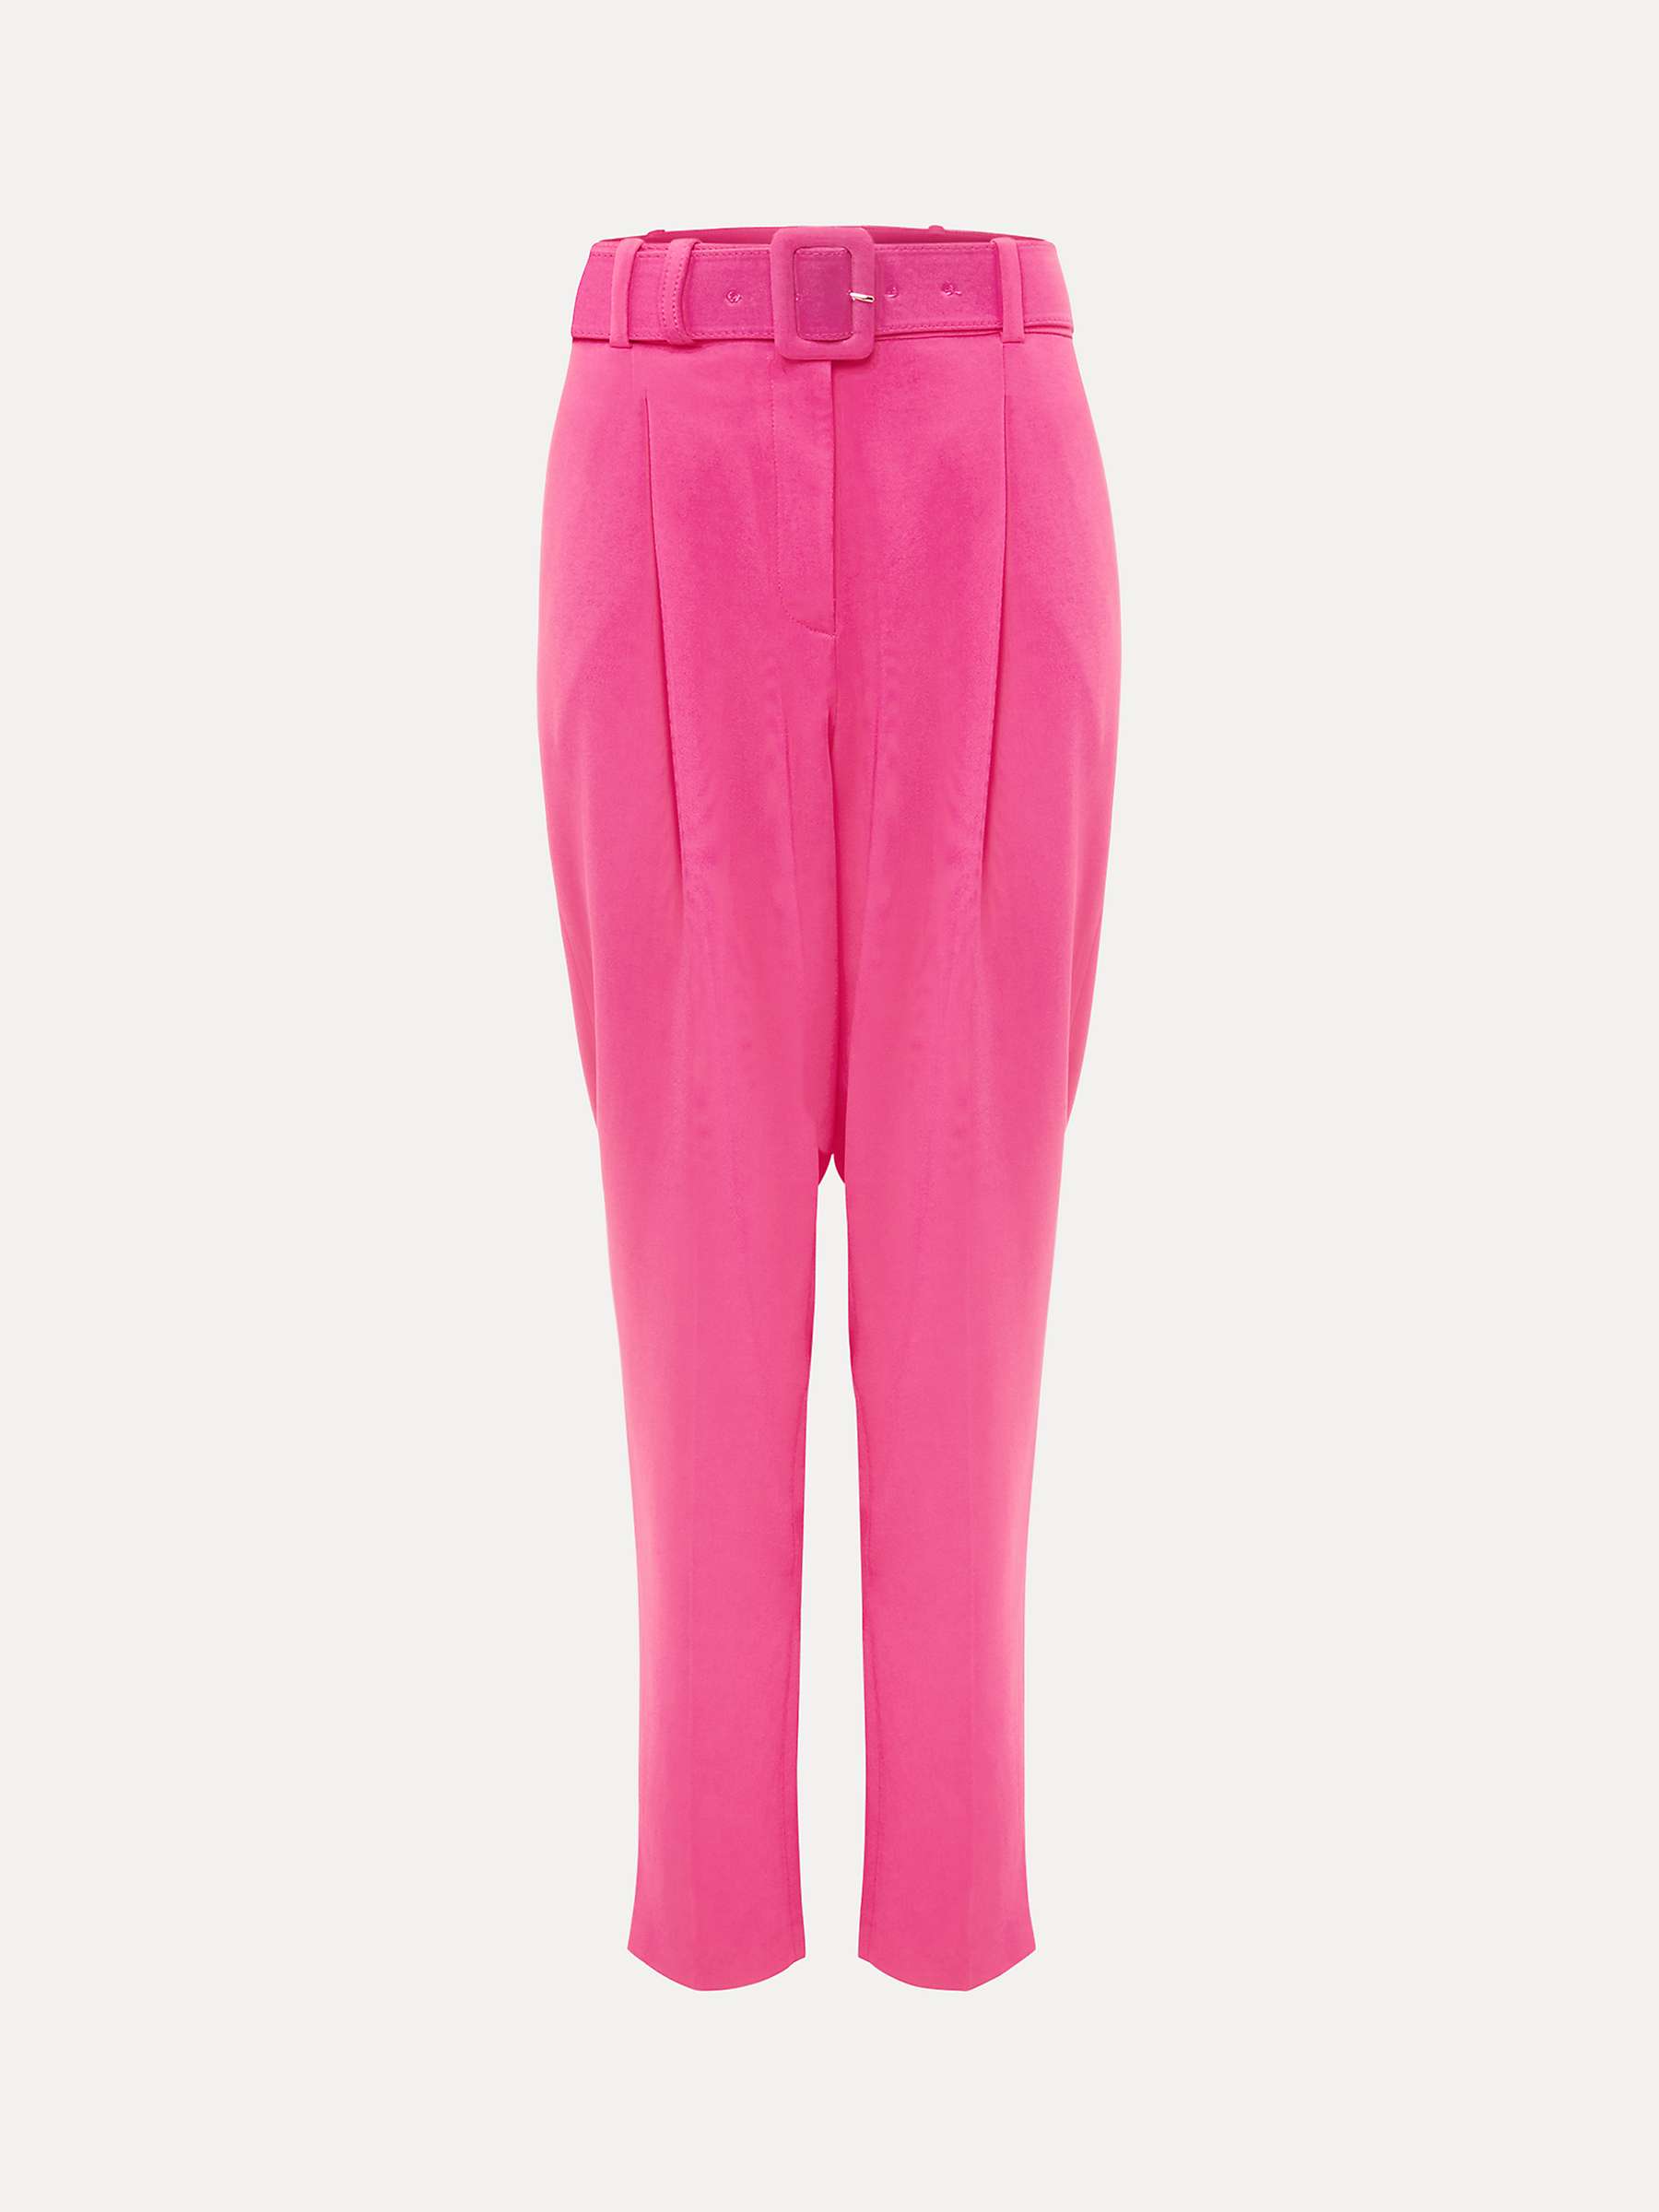 Buy Phase Eight Adria Tailored Belted Trousers, Hot Pink Online at johnlewis.com